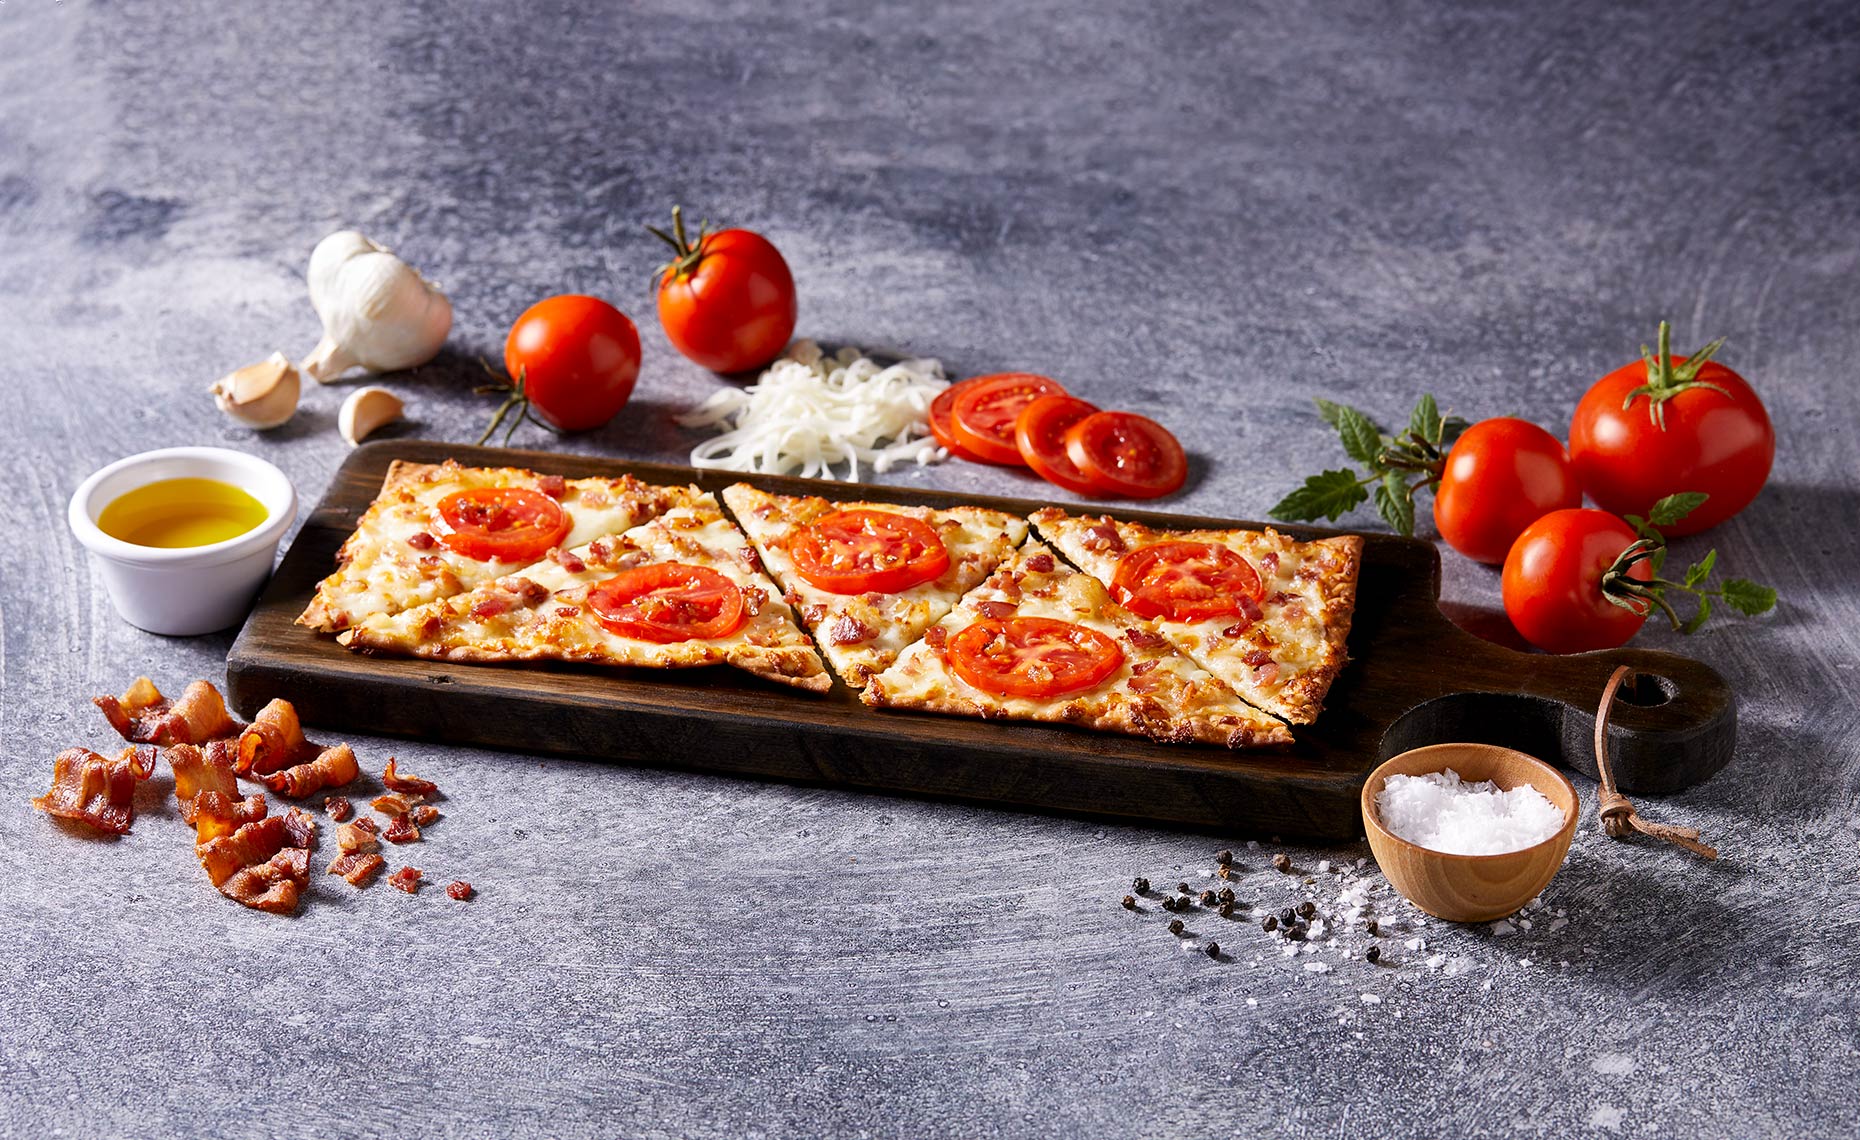 Flat bread pizza on cutting board with ingredients